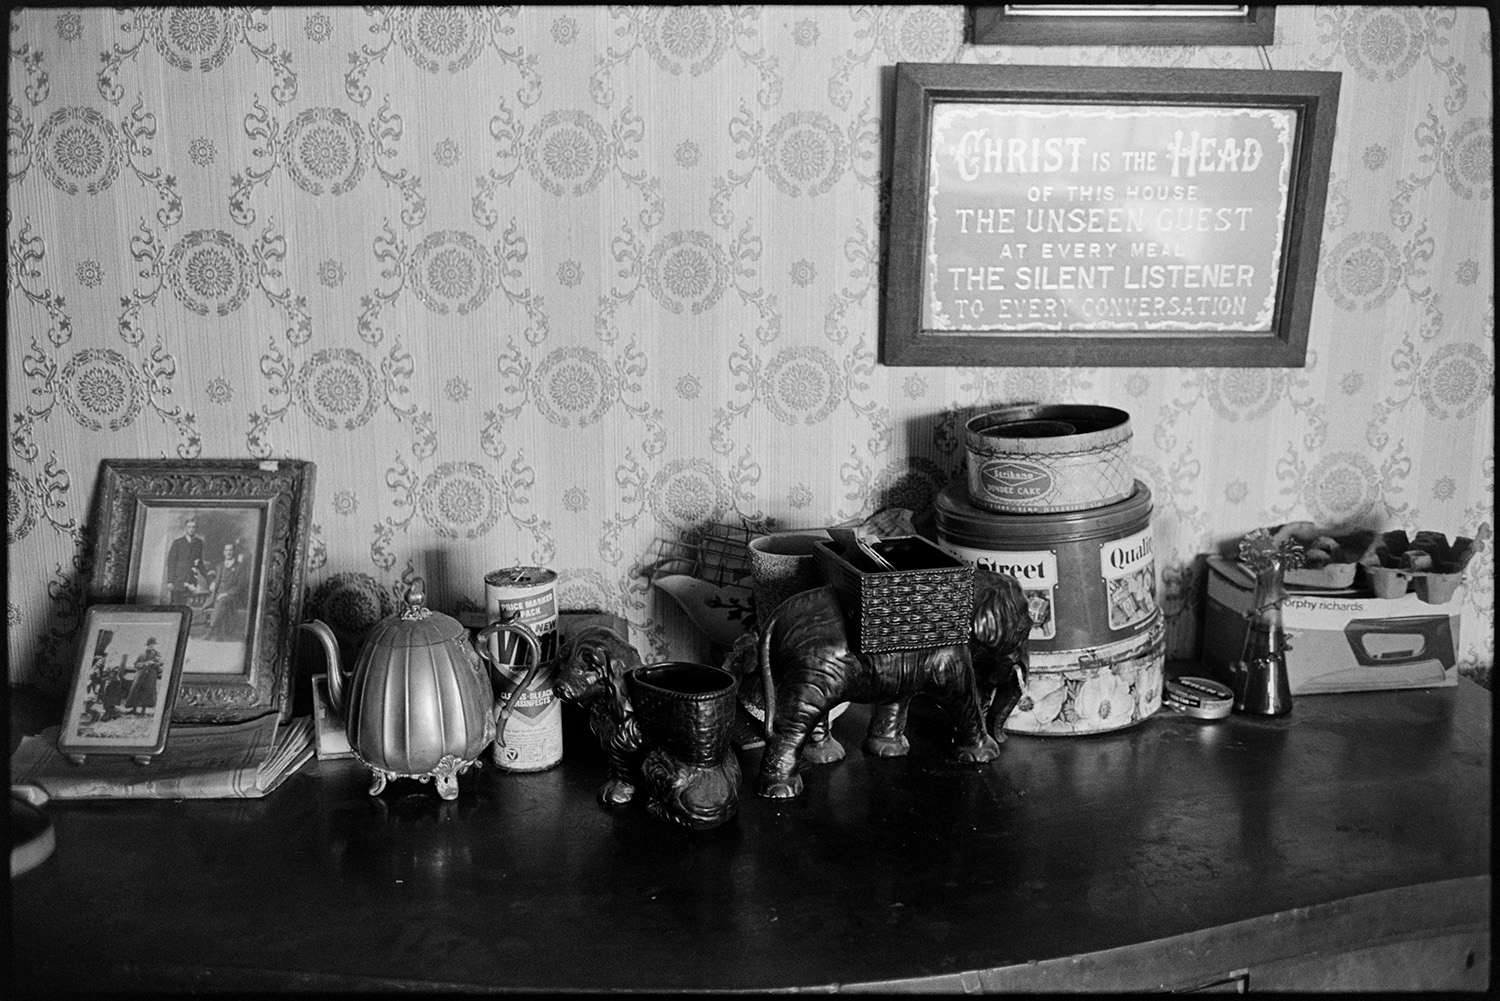 Farmhouse interior, side table, harmonium, electric fire.
[Ornaments, including a dog and elephant, framed photographs, tins, egg boxes and an electric iron box on a side table in the Ford family house at Venton, near Hollocombe. A religious framed motto is hung on the wall behind the table.]